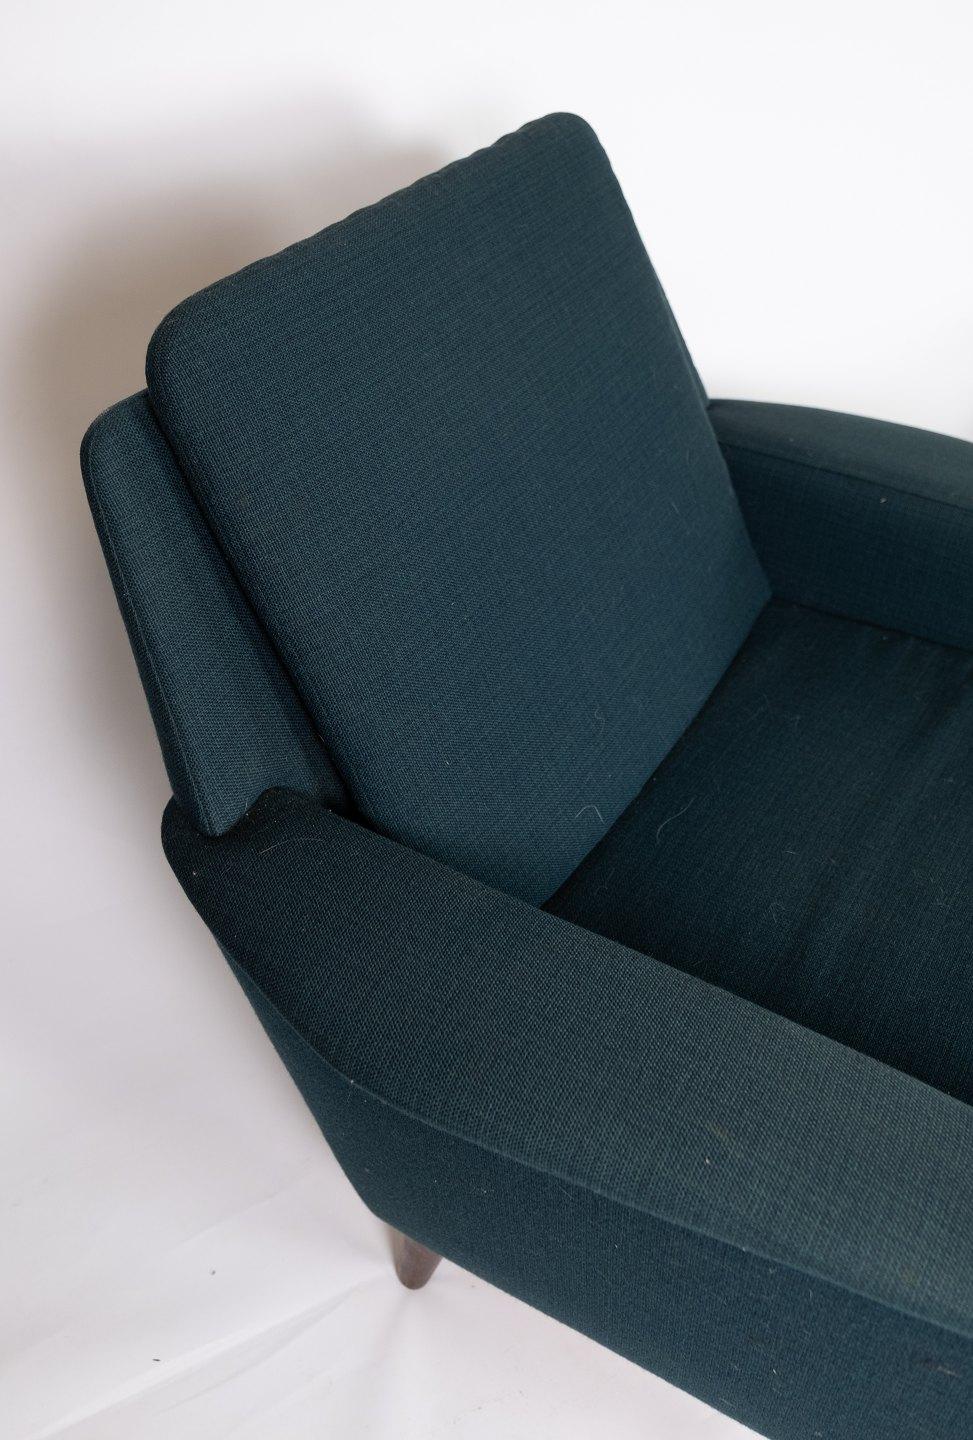 Mid-Century Modern Set Of 2 Armchairs Made In Dark Turquoise Wool By Fritz Hansen From 1960s For Sale